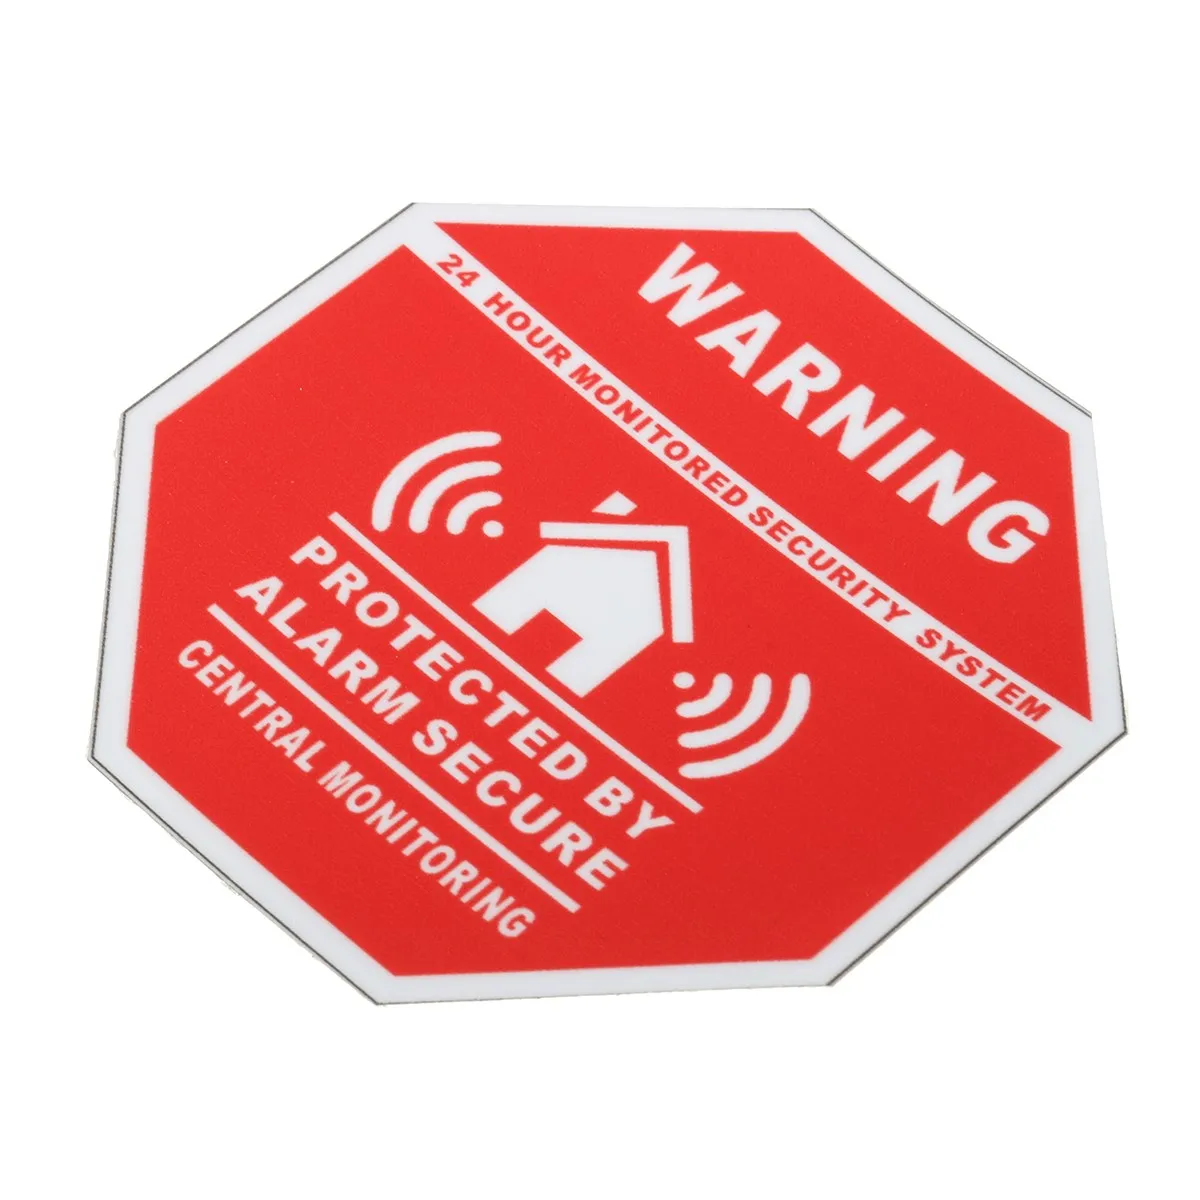 Details about   Home Business Store Security Window Warning Stickers Decal Alarm System Bulk Lot 